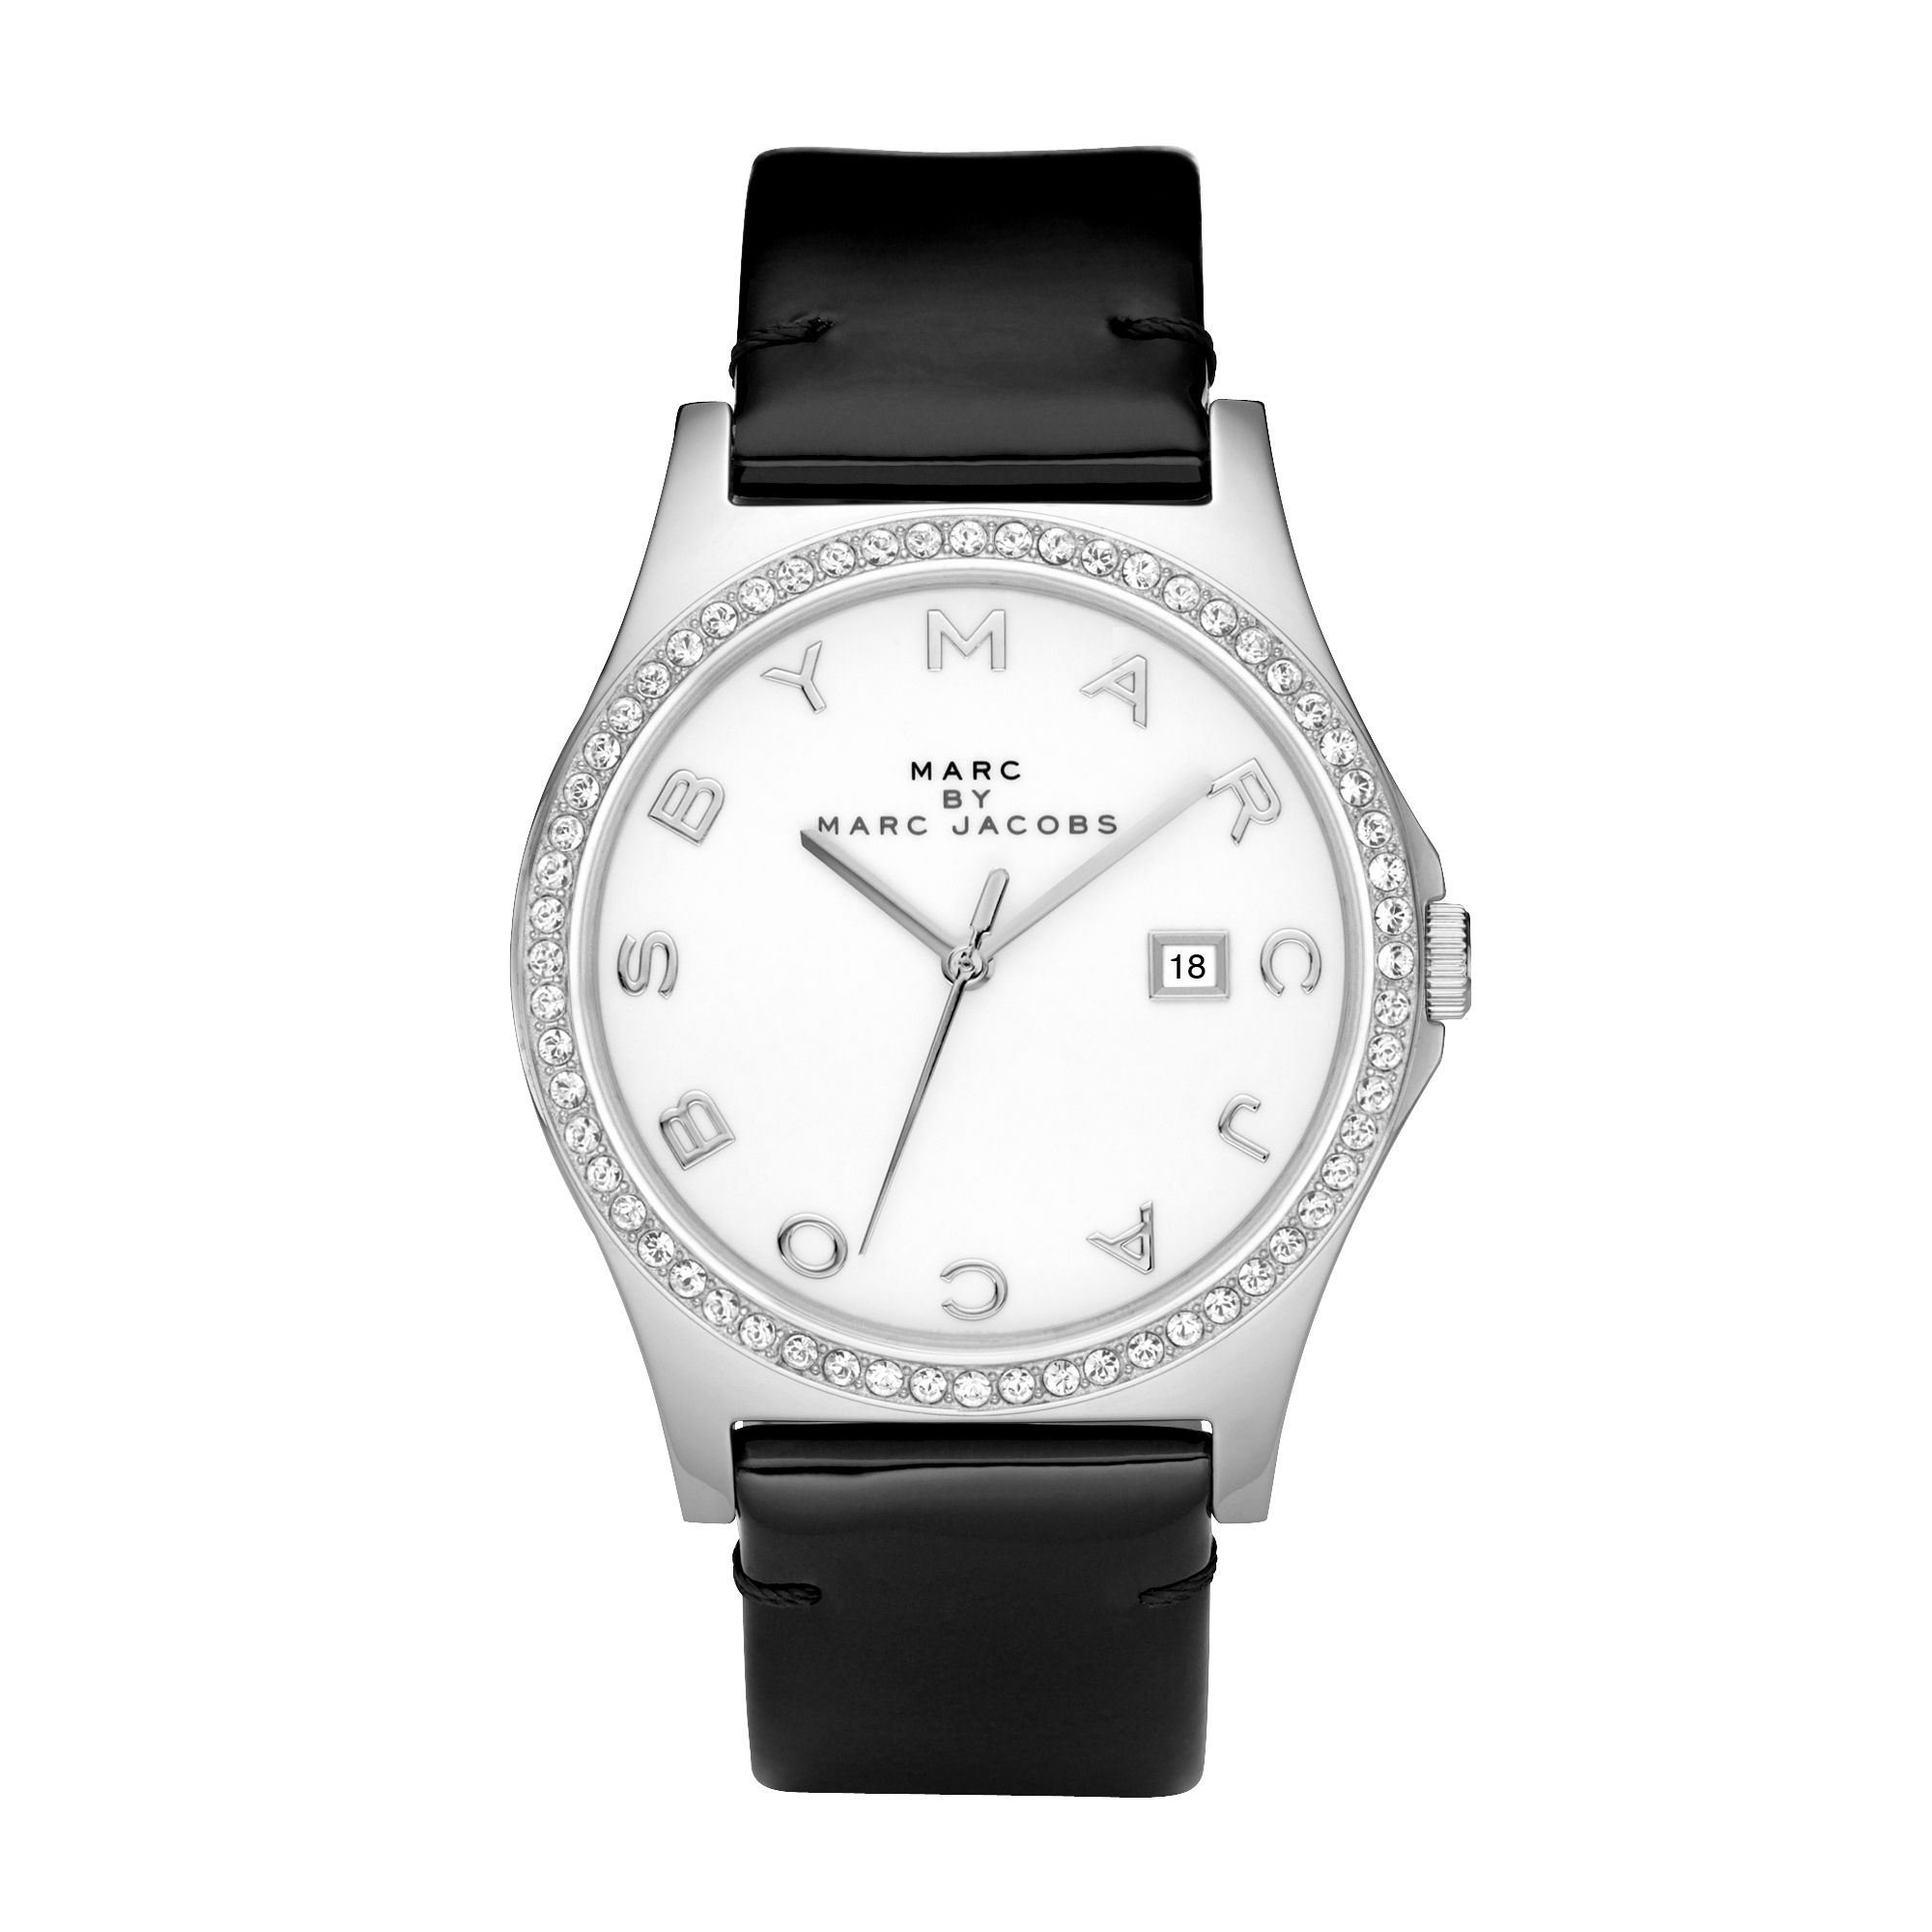 Marc by Marc Jacobs Women's Patent Leather Strap Watch, Black at John Lewis